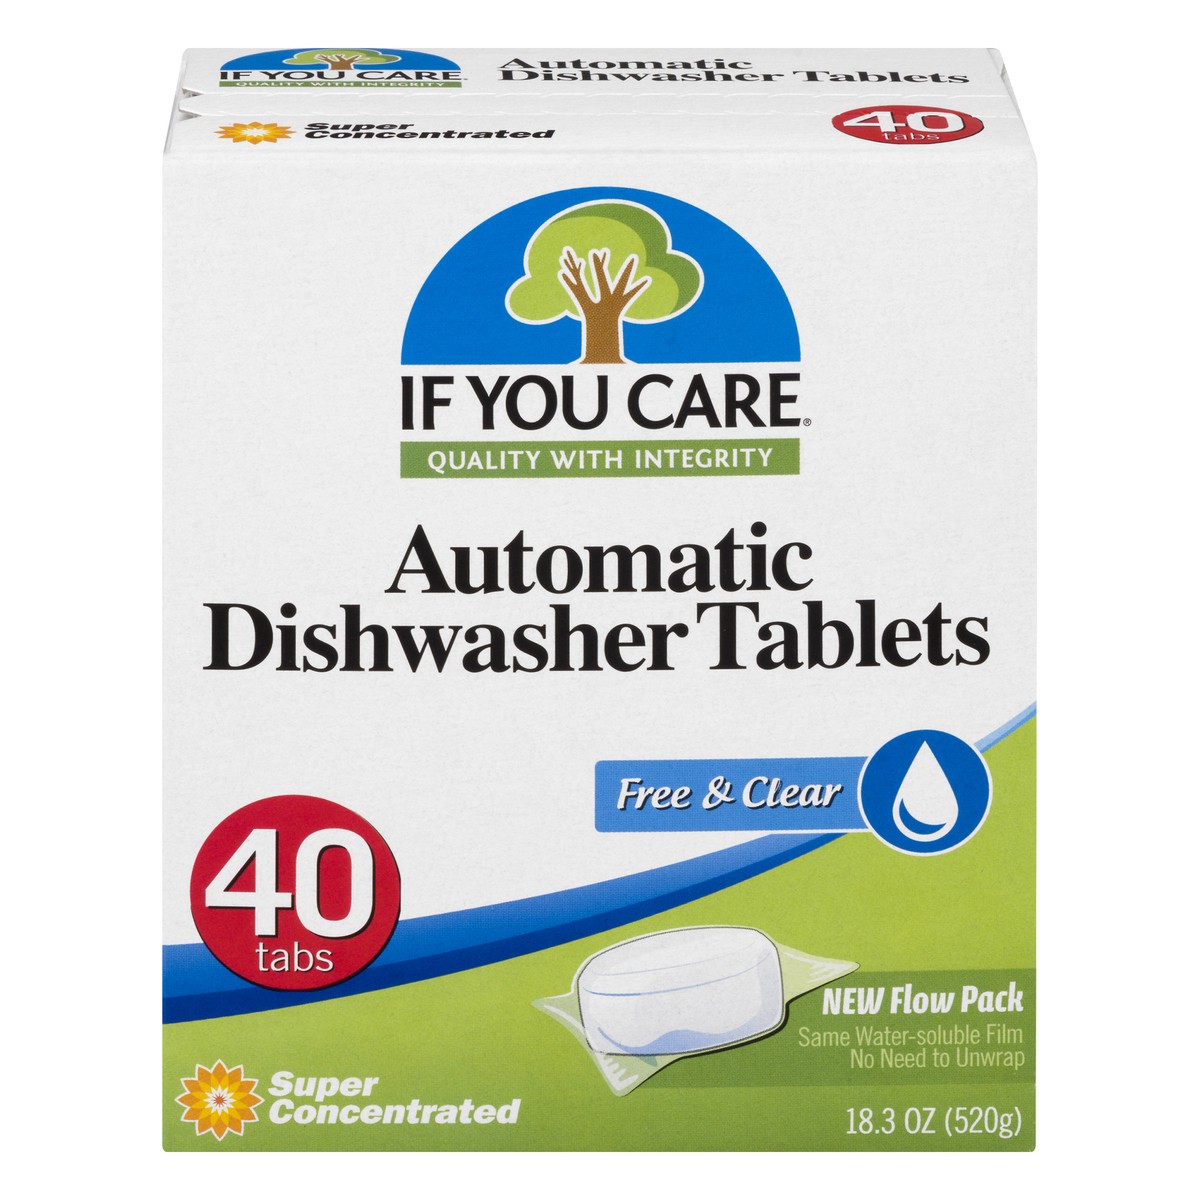 slide 1 of 9, If You Care Source Atlantique, Inc If You Care Dishwasher Tablets, Automatic, Super Concentrated, Free & Clear 40Ct, 18.3 oz